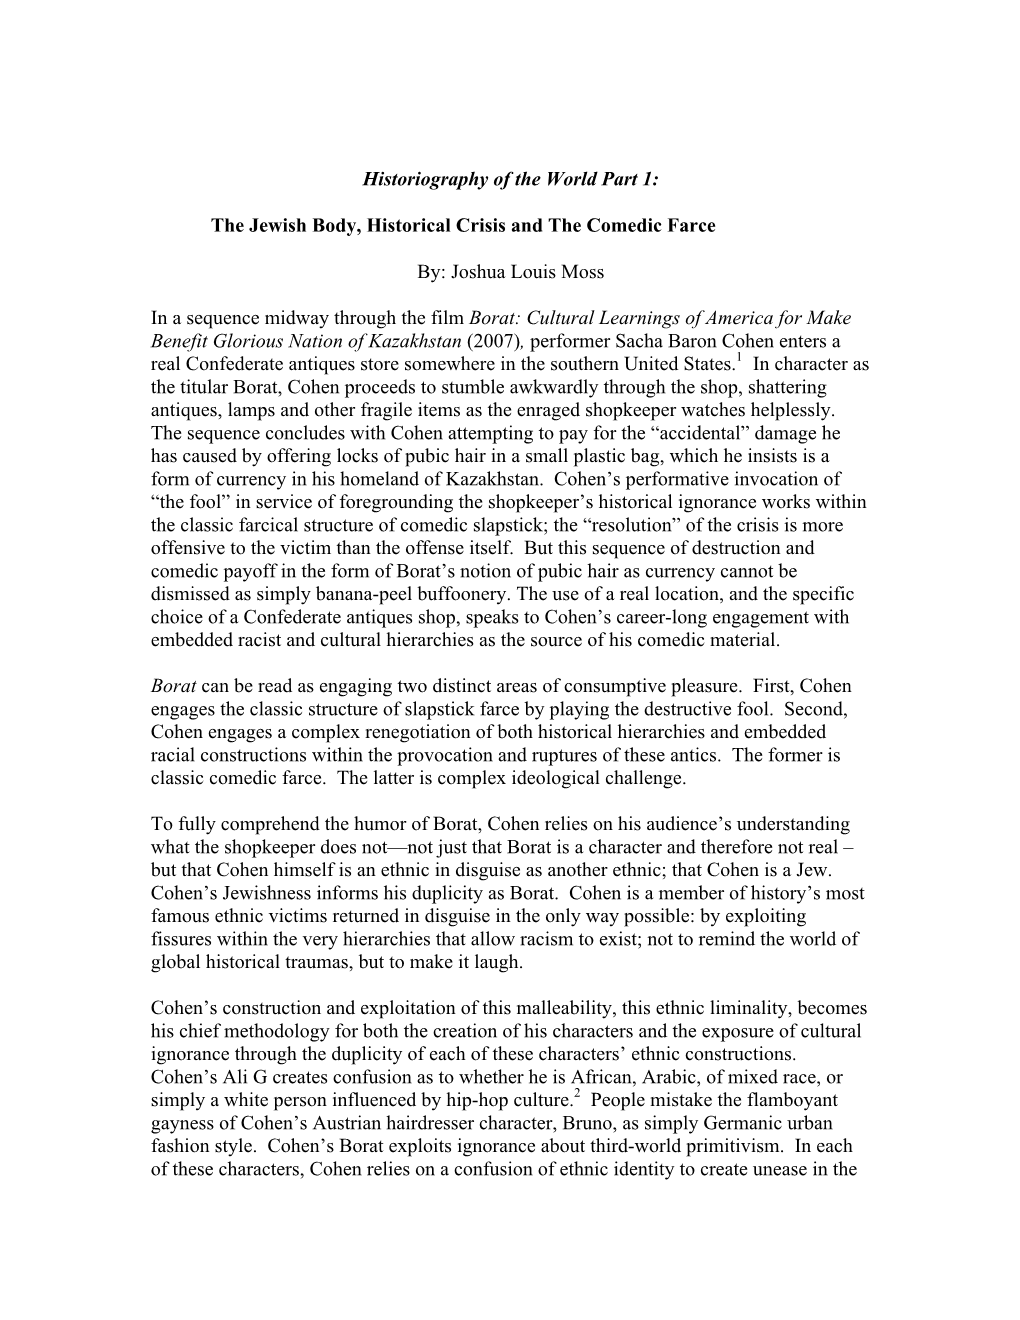 Historiography of the World Part 1: the Jewish Body